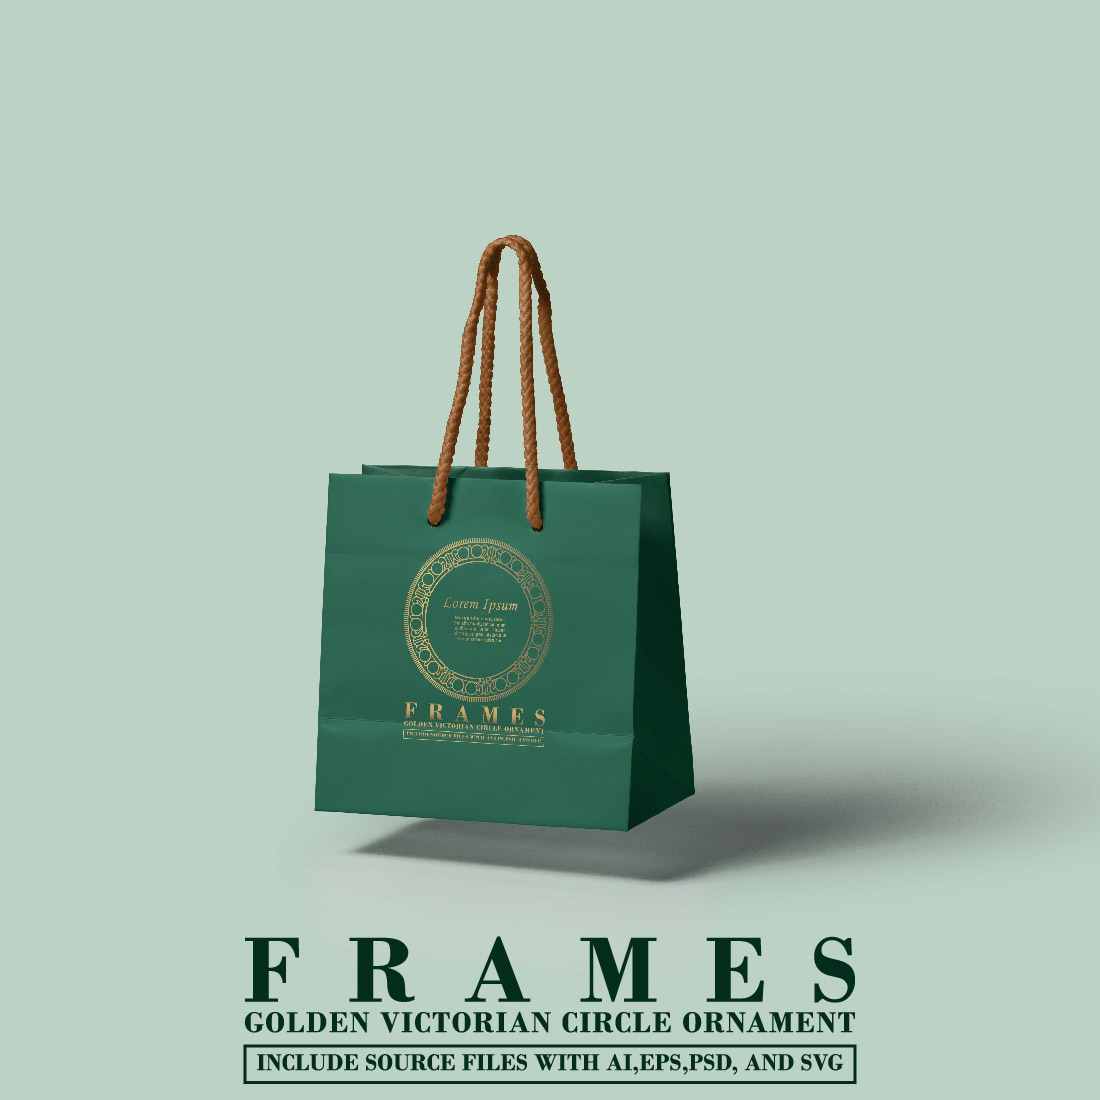 Images of a paper bag with a unique gold frame